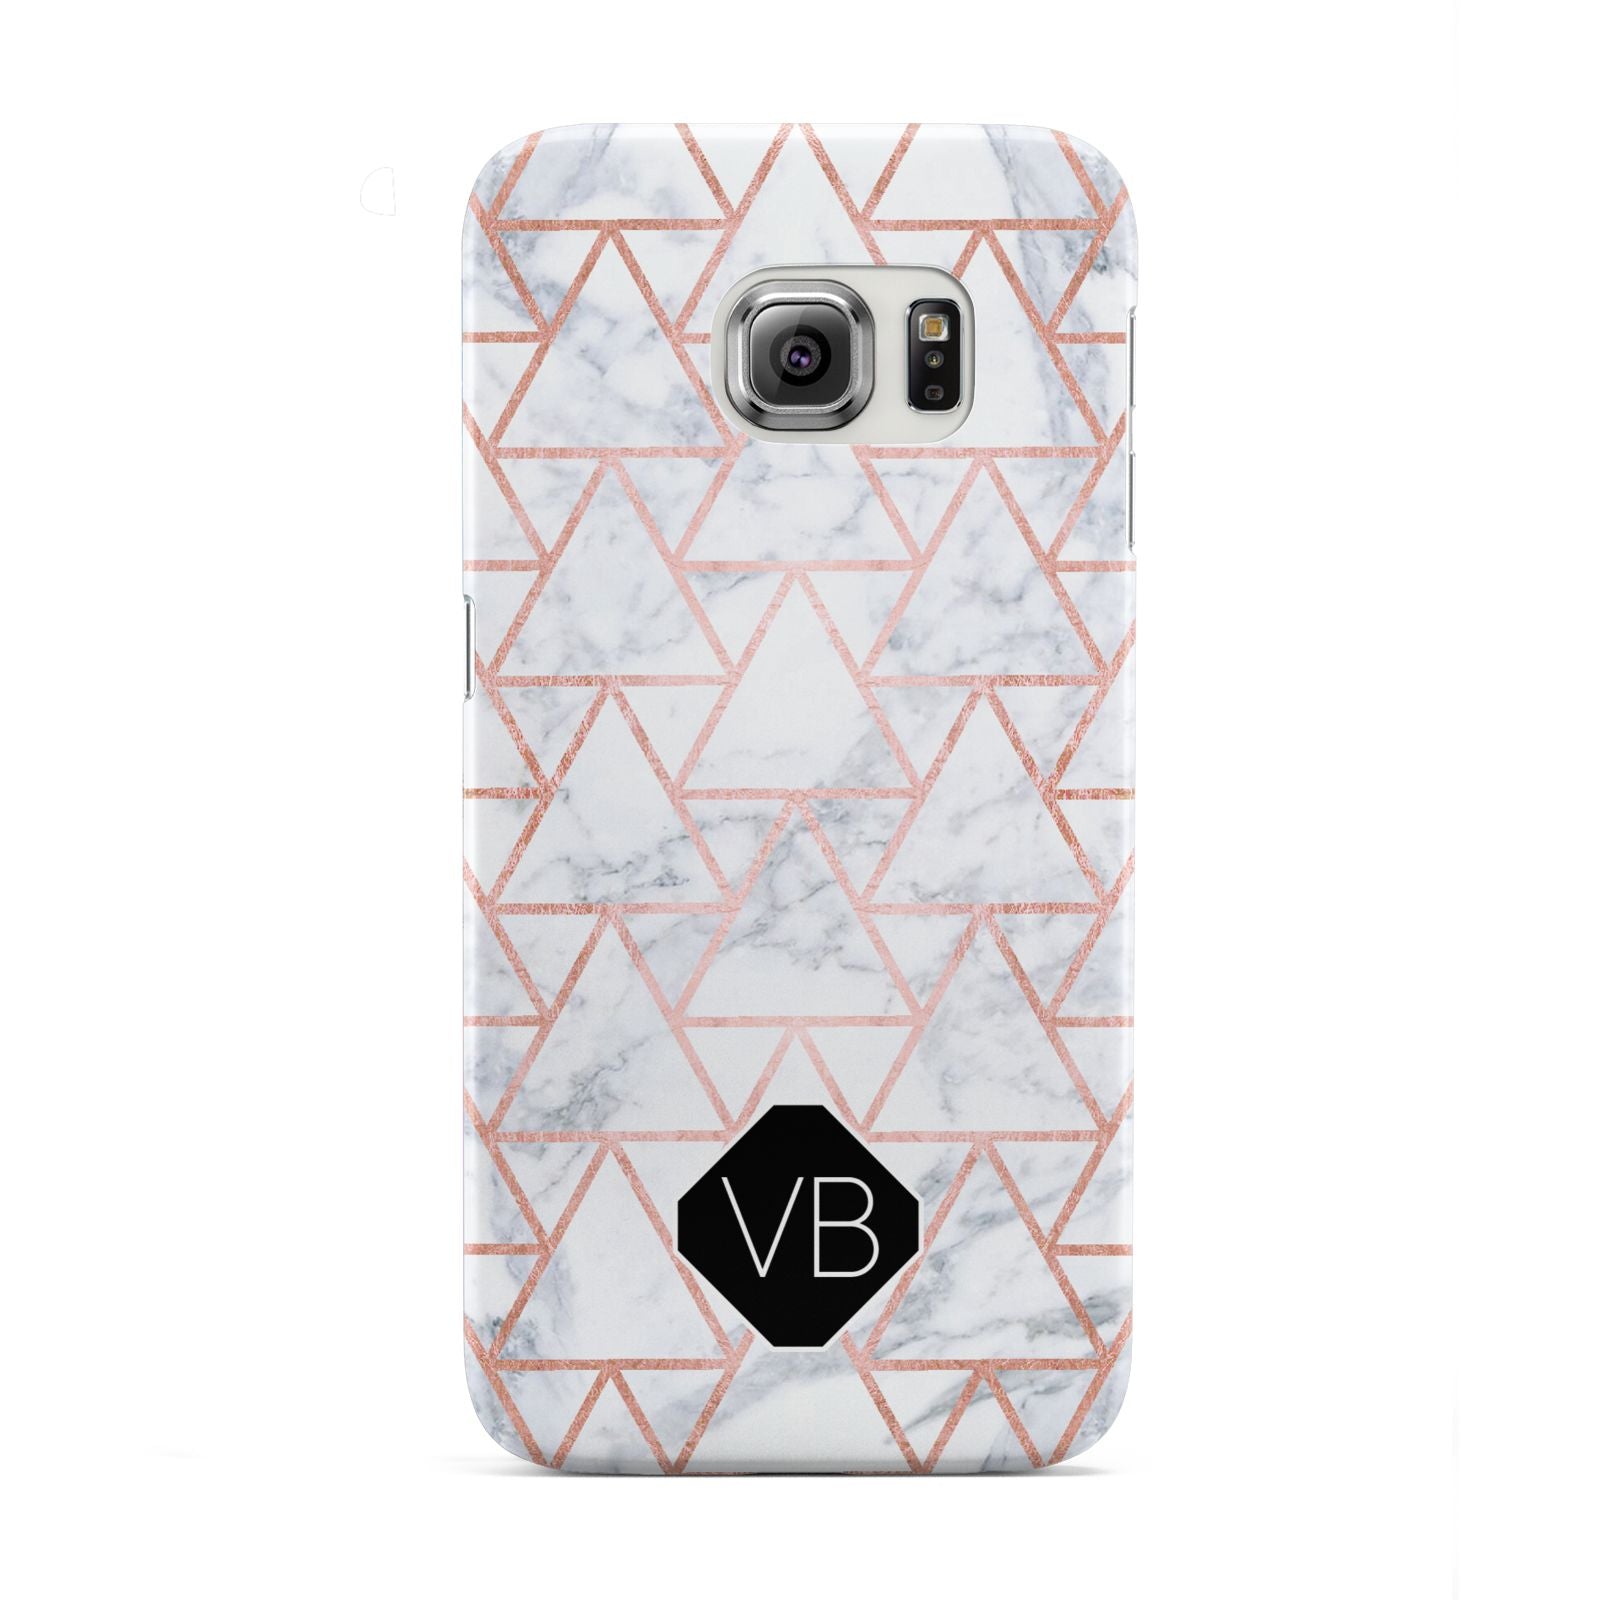 Personalised Rose Gold Grey Marble Hexagon Samsung Galaxy S6 Edge Case